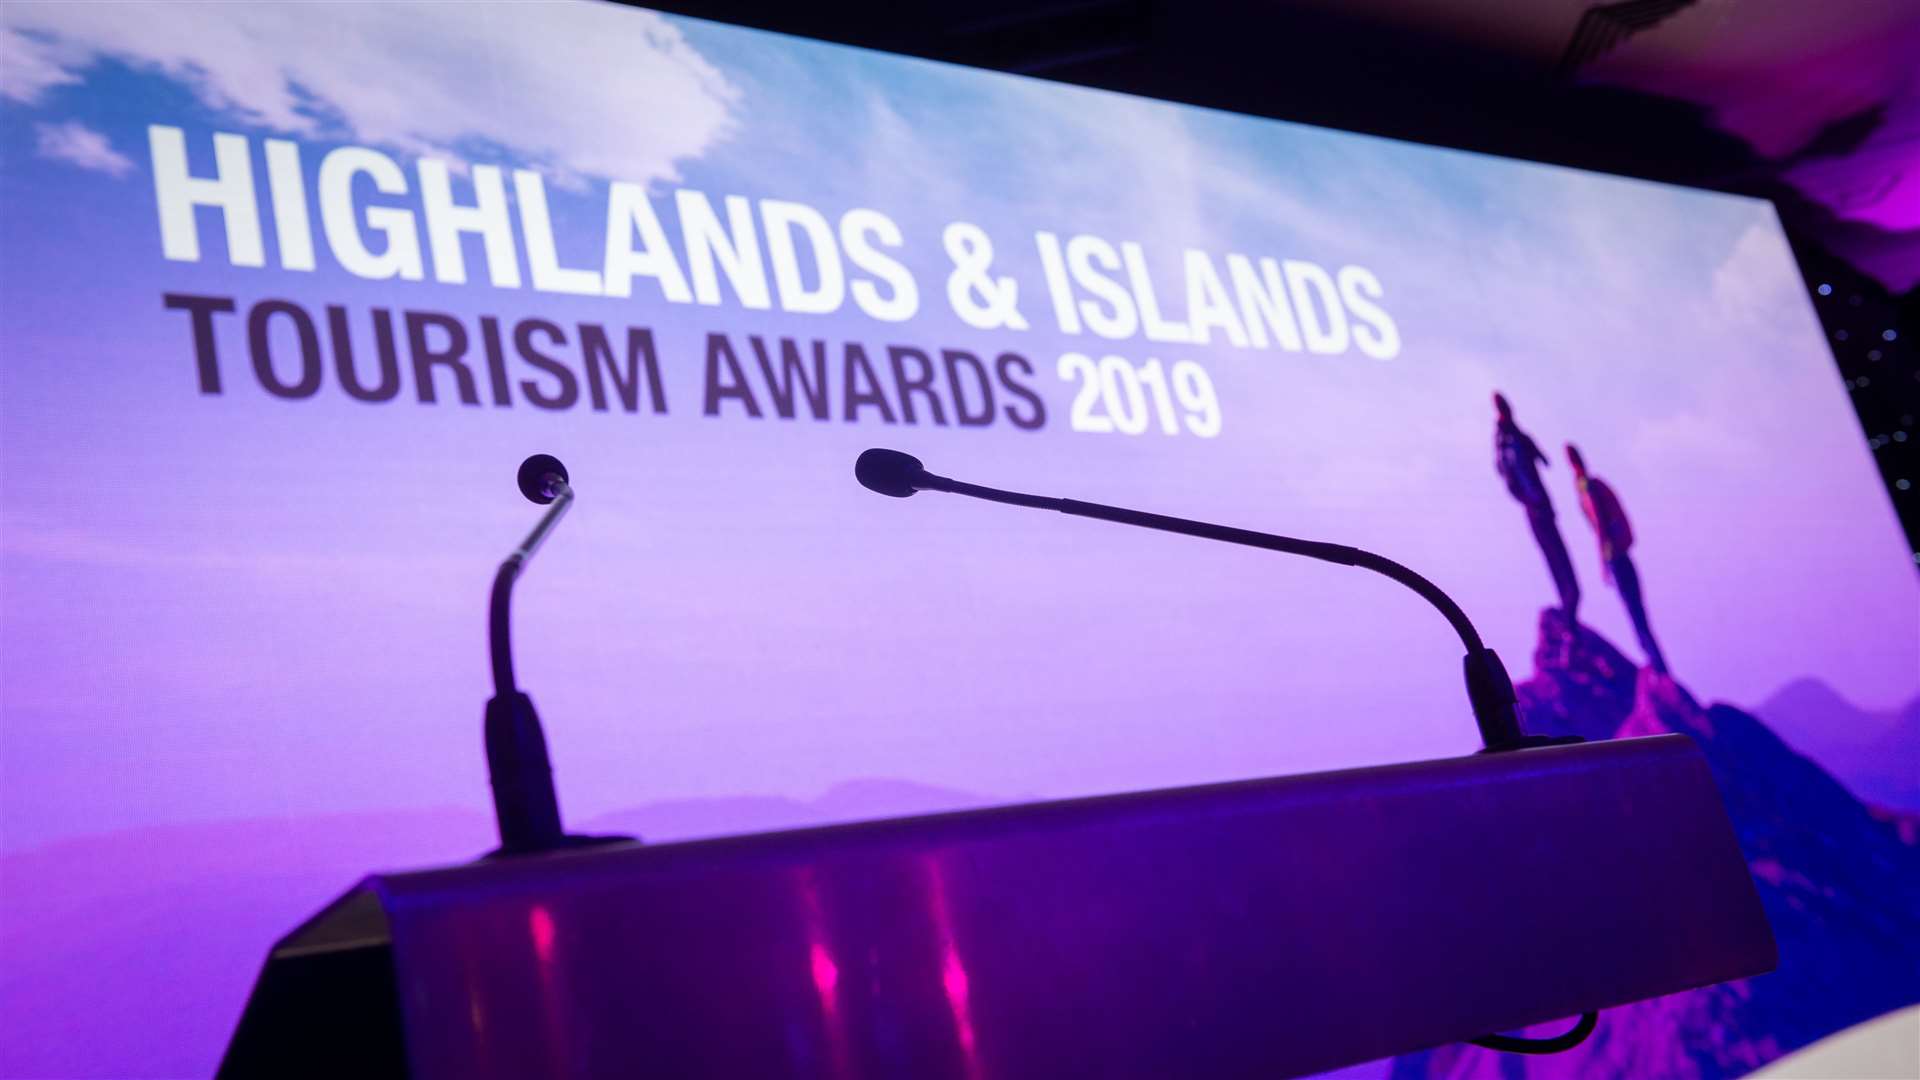 Organisers of the HITA awards felt it was inappropriate to go ahead this year.